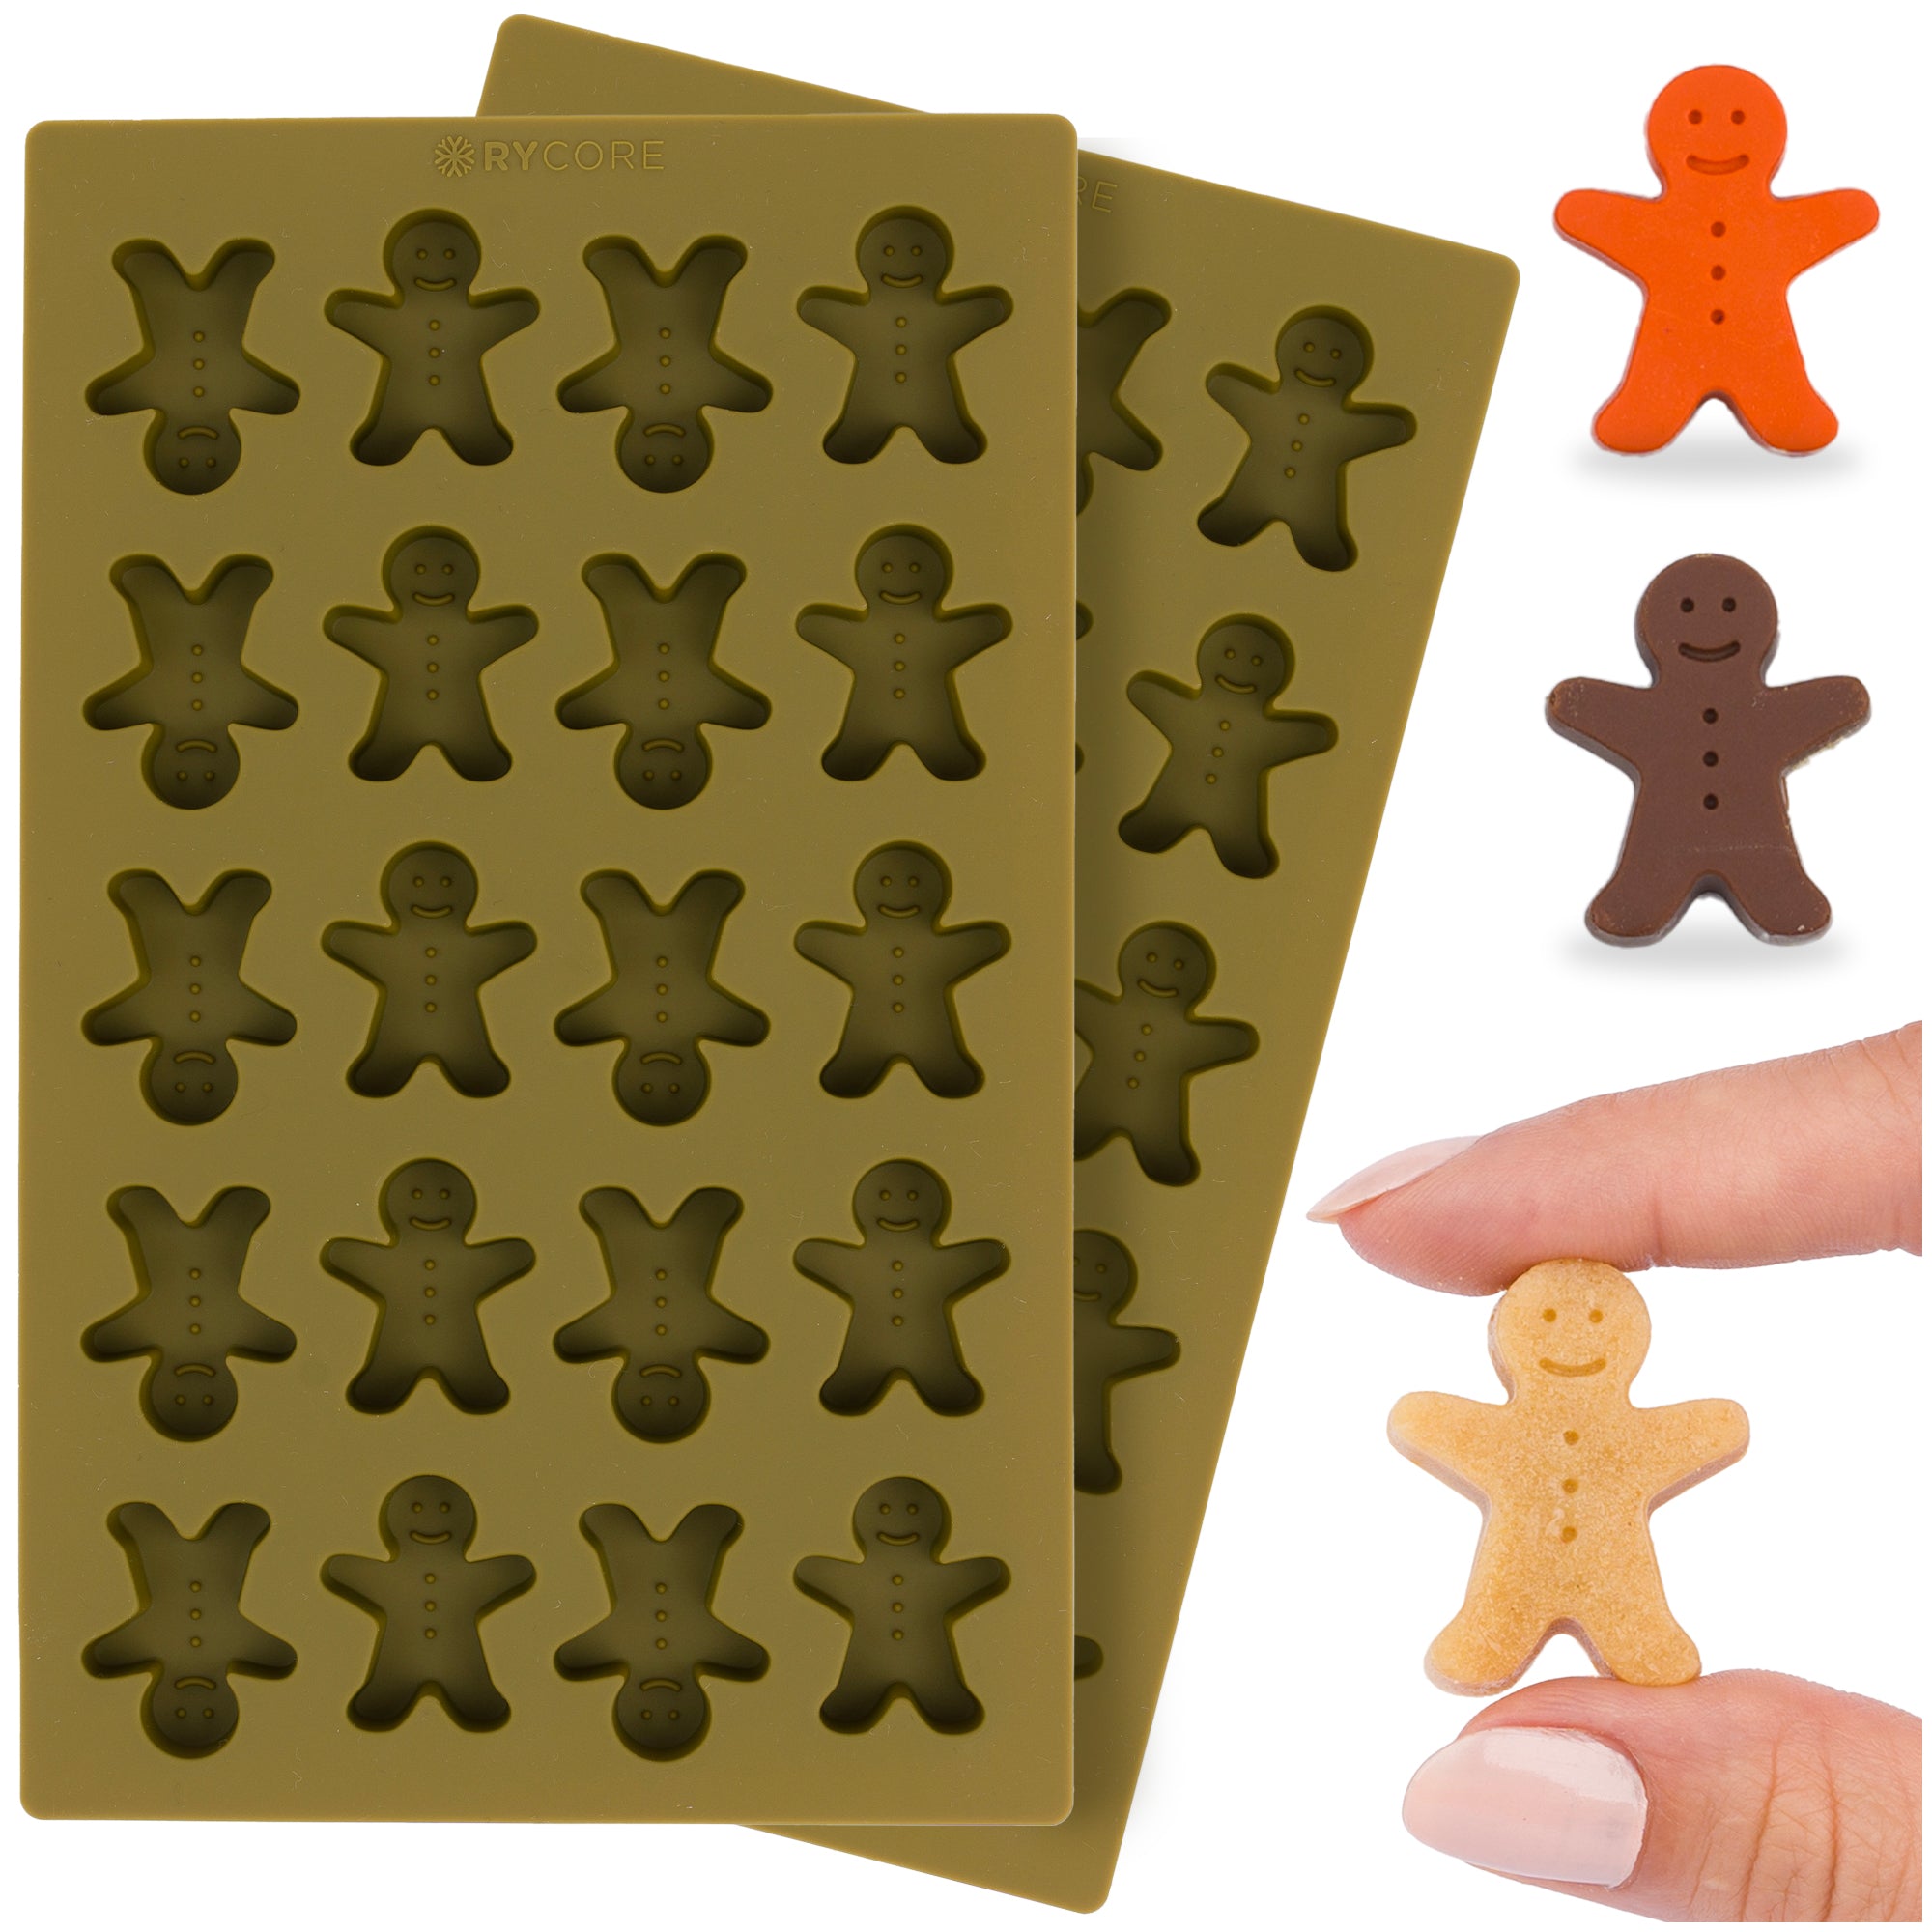 2 Pack - Mini Gingerbread Man Silicone Mold - Perfect for Baking Chocolates, Candies & Mini Gingerbread Man Cookies - Unique Gingerbread Man Mold Design for Holiday Desserts & Special Celebrations